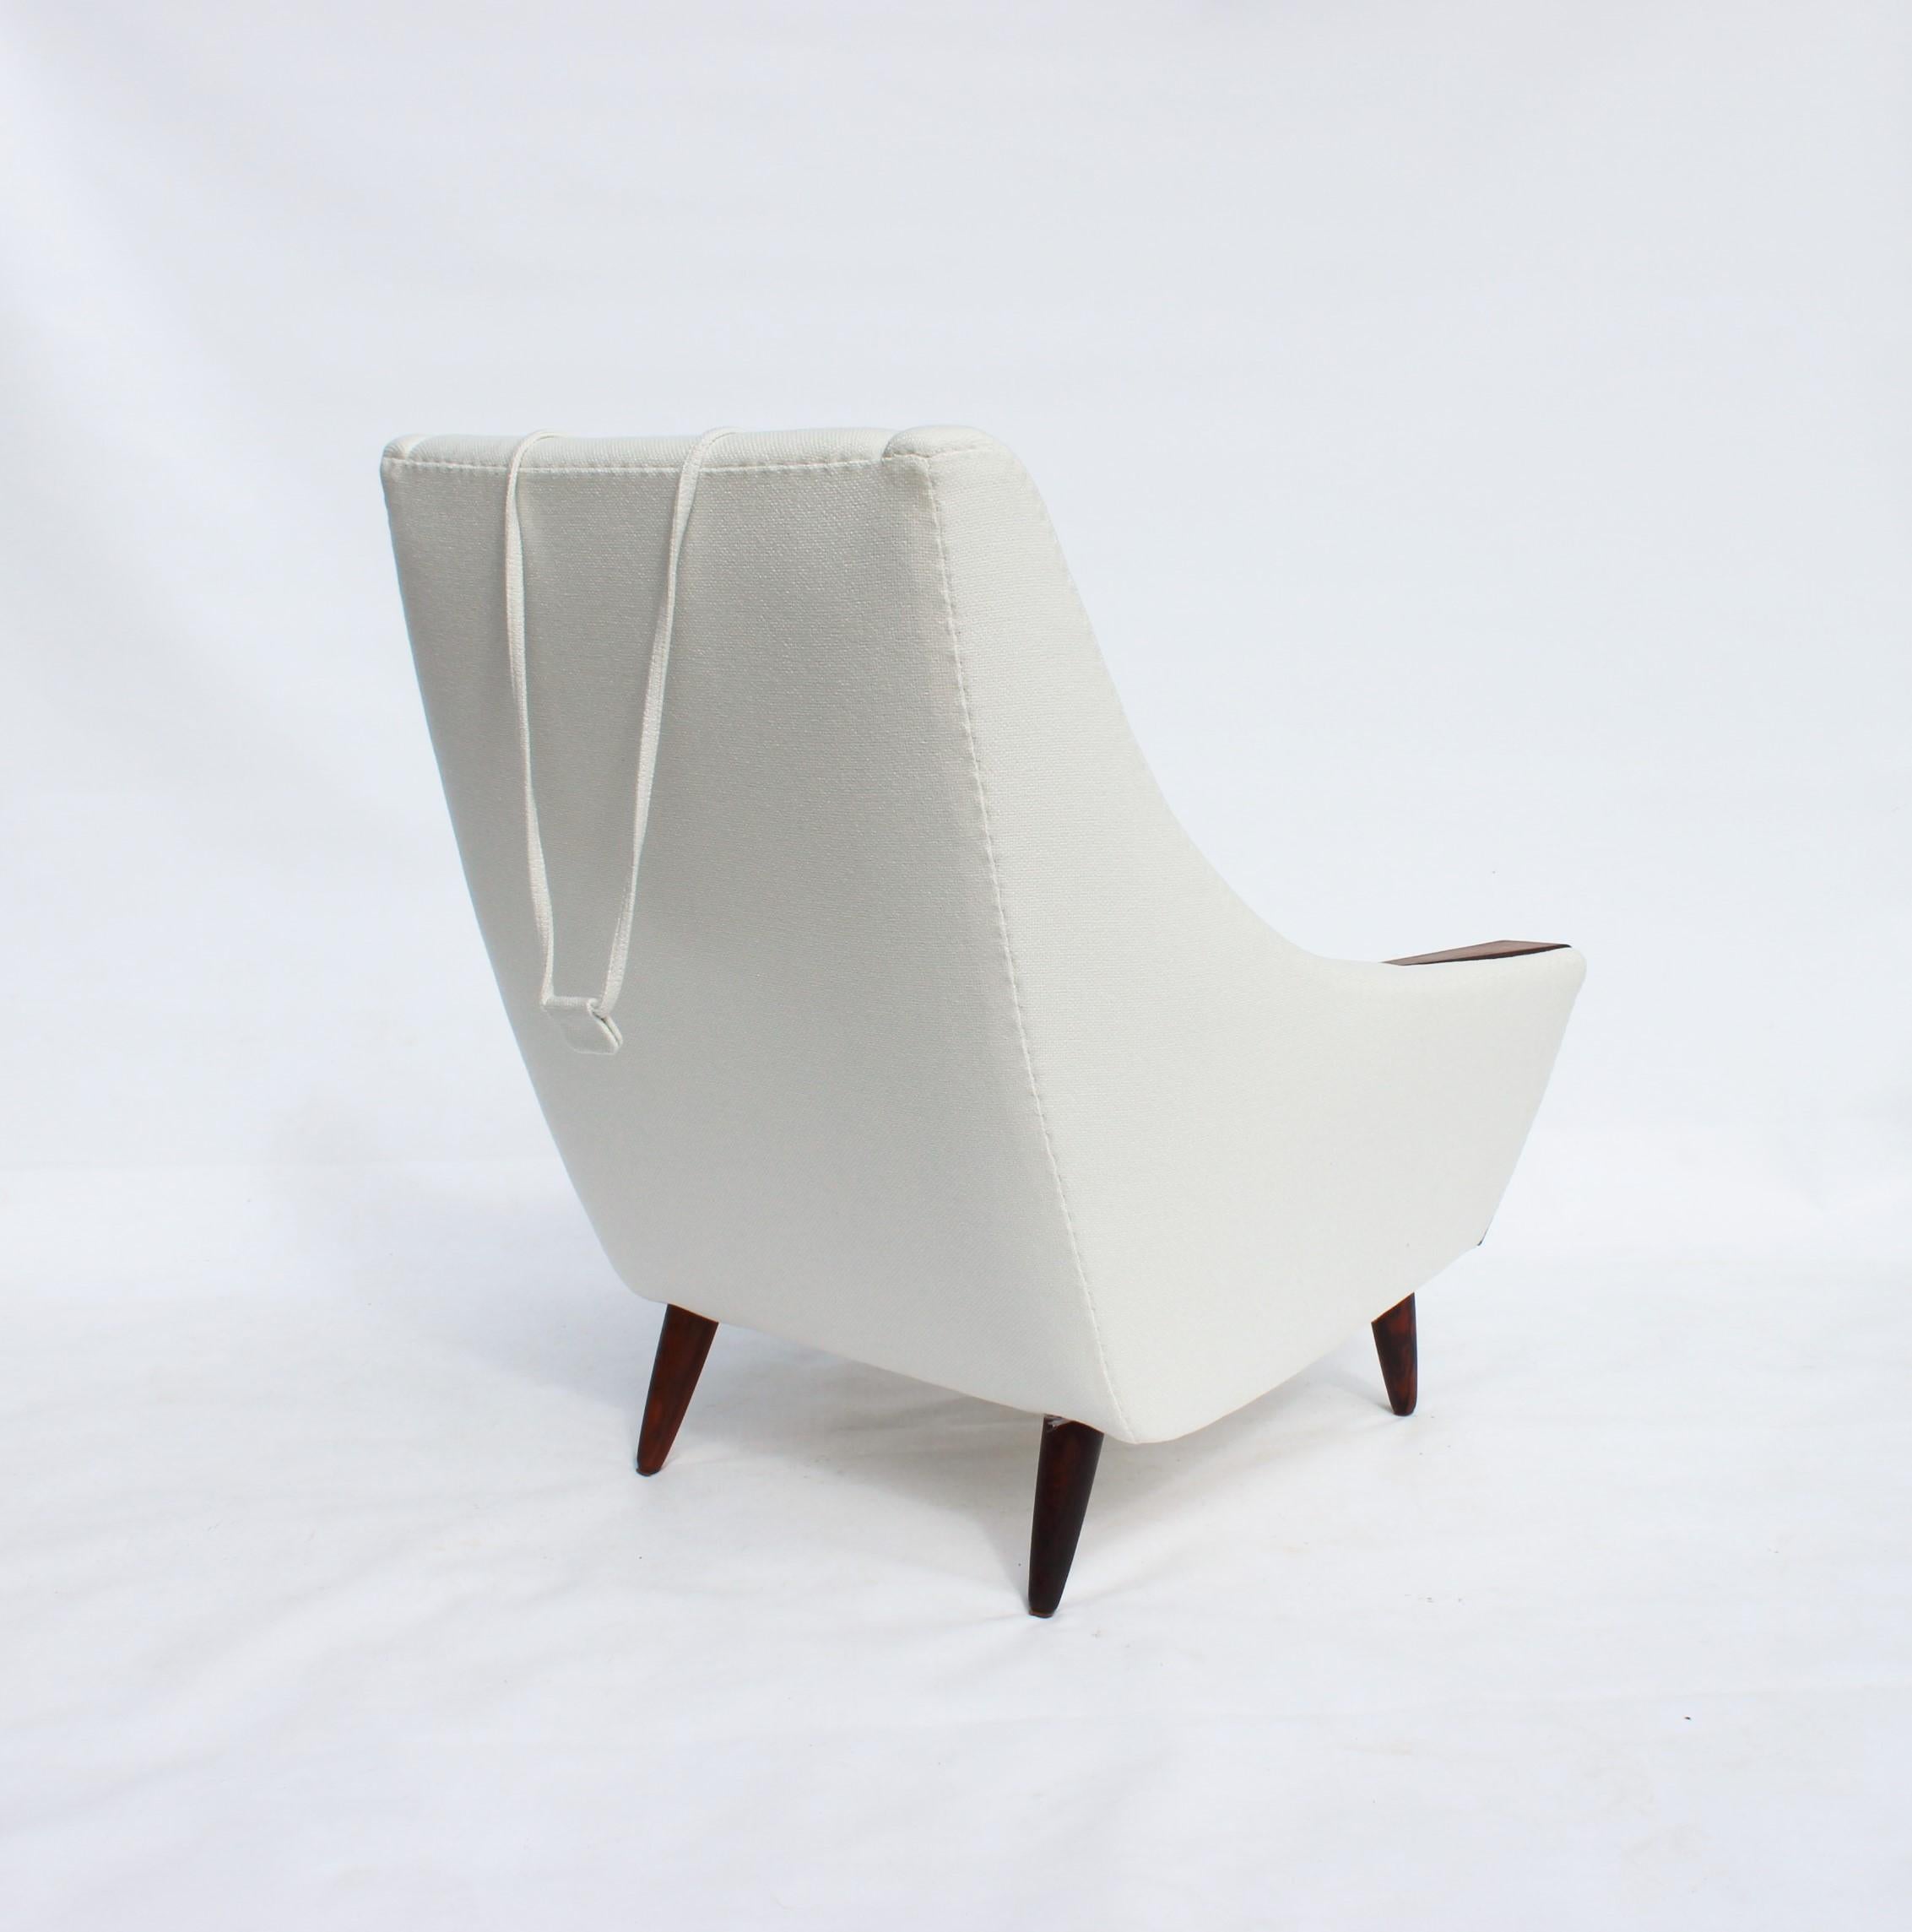 Easy Chair with Tall Back Upholstered in White Fabric, Danish Design, 1960s For Sale 1